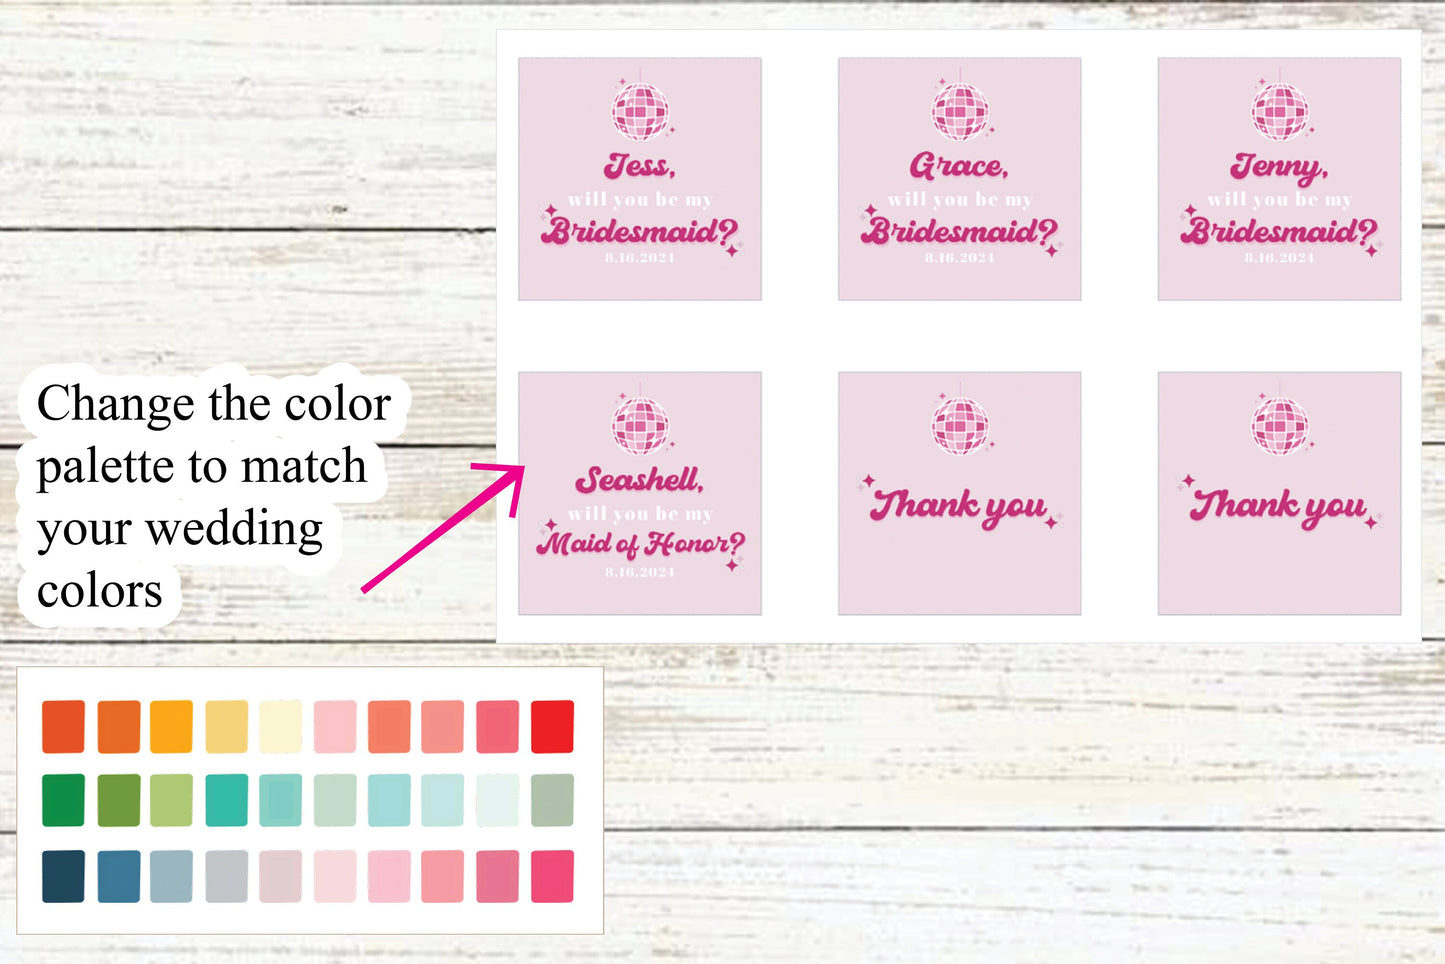 Bridesmaid Proposal (stickers only - sheet of 6) Bridesmaid Proposal Card, Will You Be My Bridesmaid, Pink Disco Bridesmaid Proposal Sticker